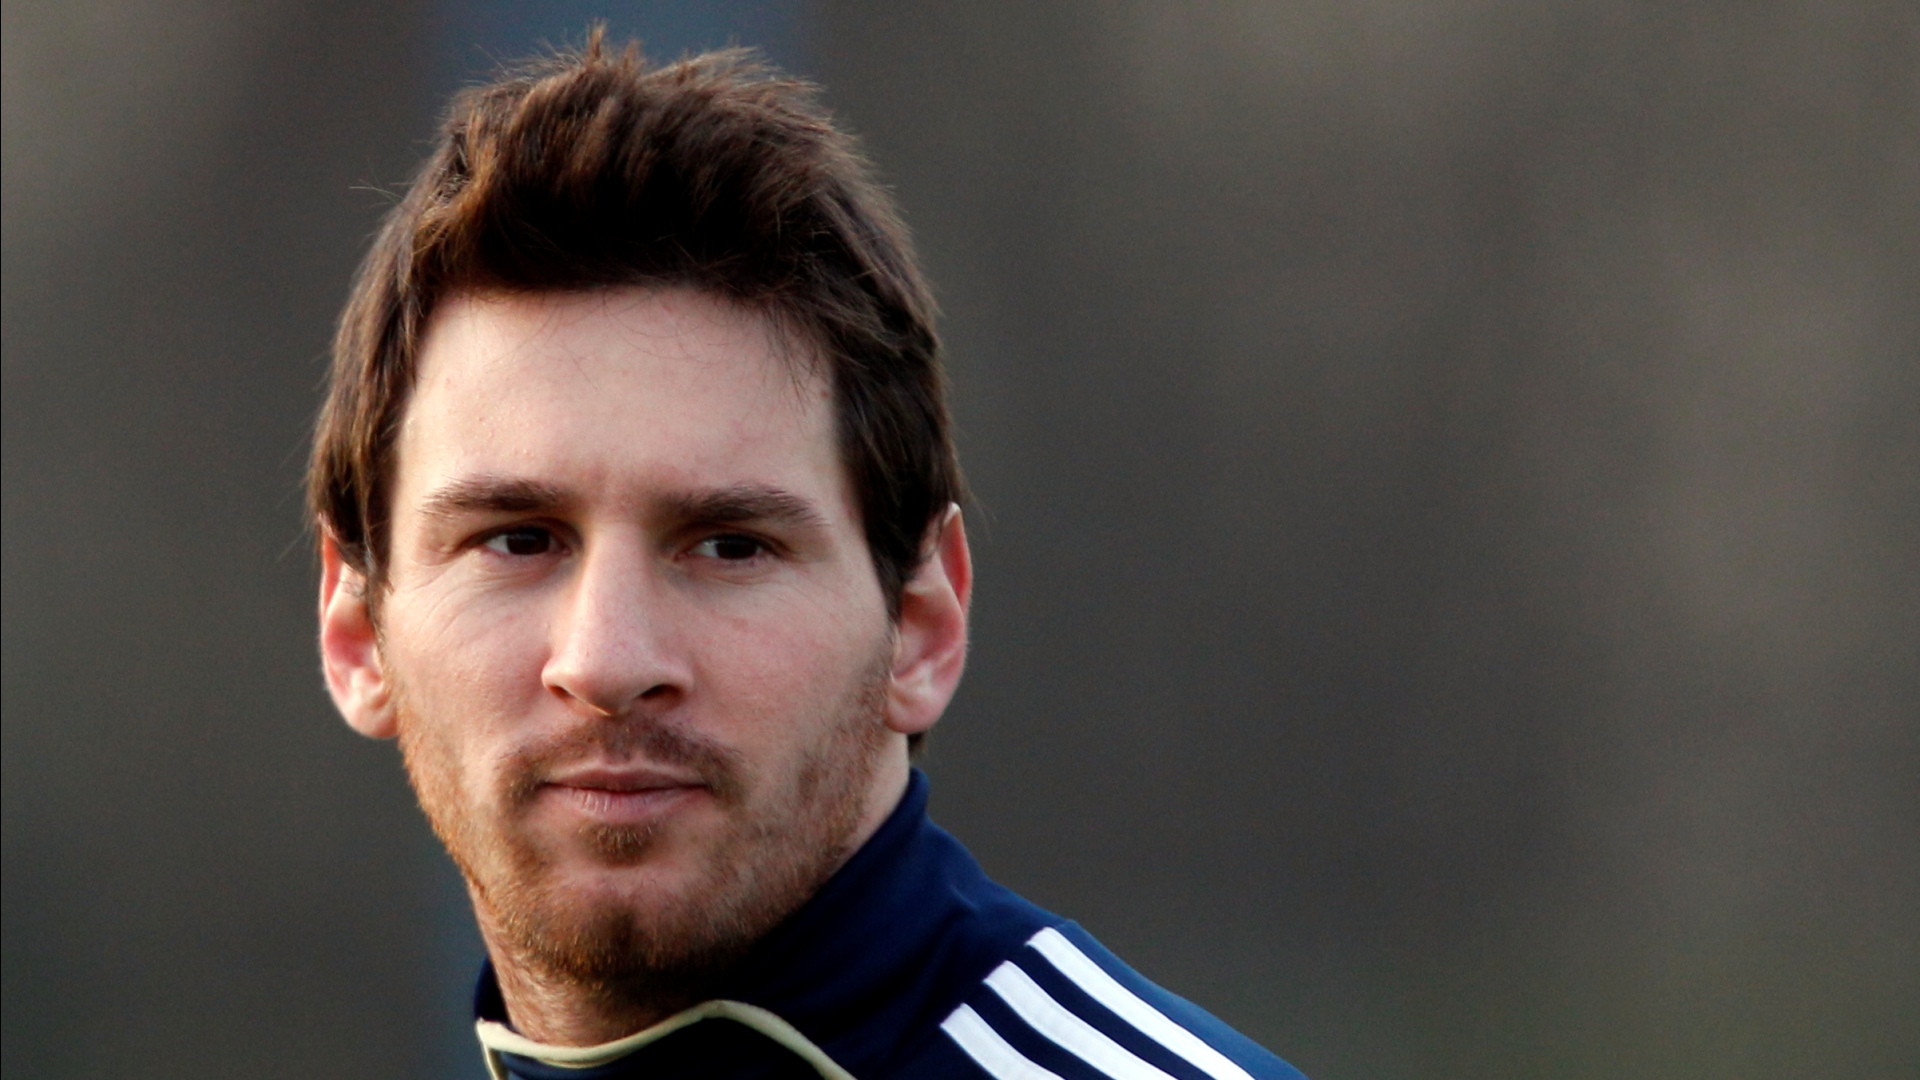 Gents Hair Style Messi - 1920x1080 Wallpaper 